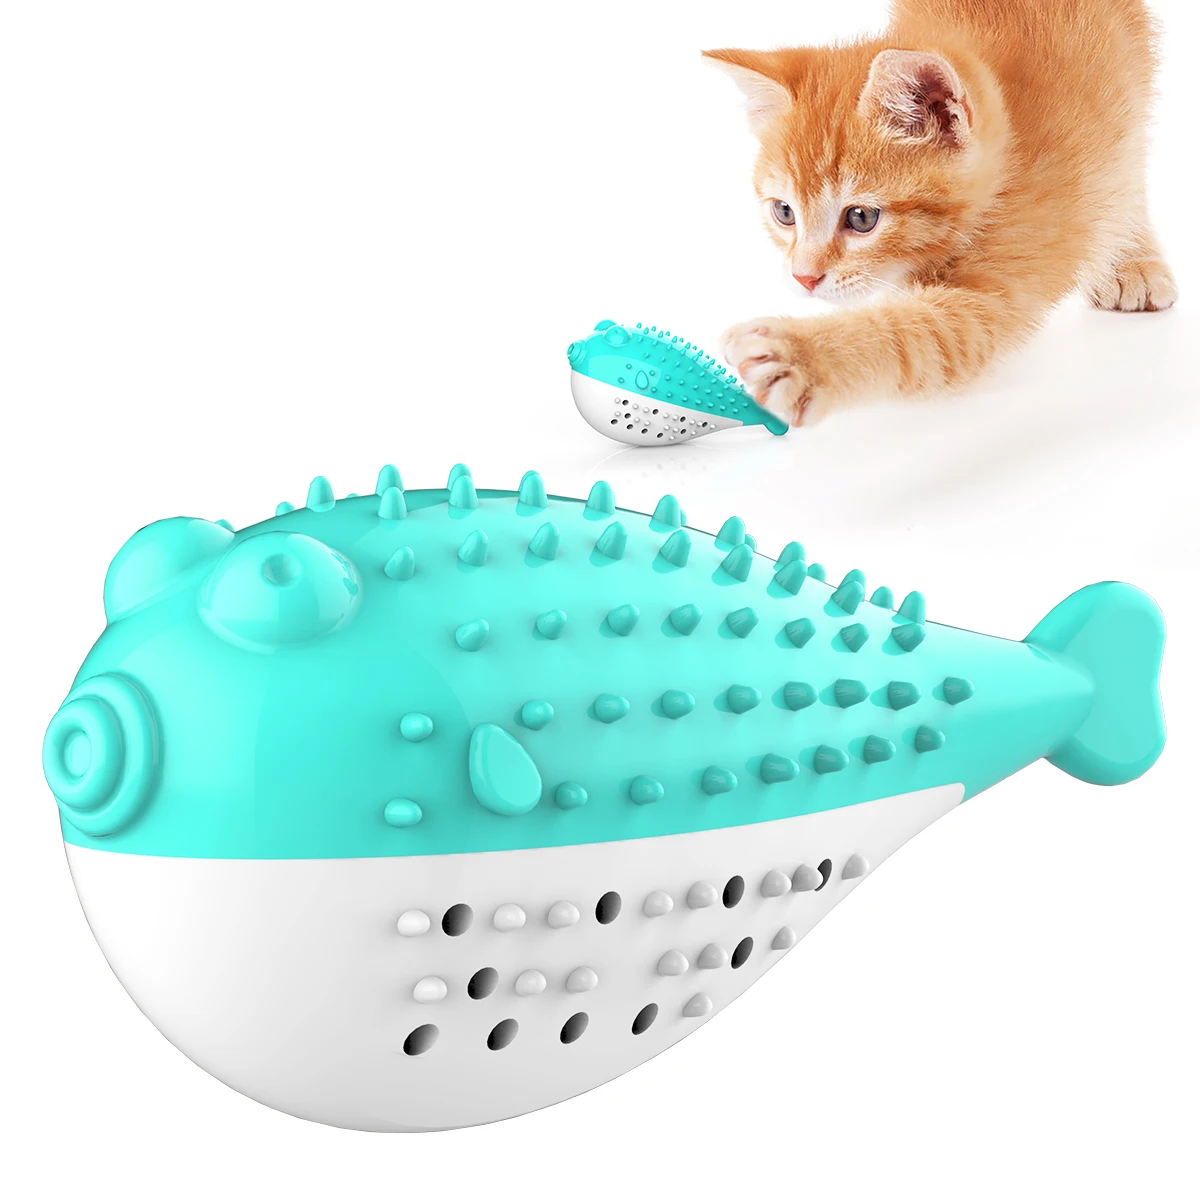 Funny Cat Toy Puffer Fish Kitten Interactive Molar Toy Attractive Catnip  Pufferfish Plastic Air Inflated Fish Cute Cat Chew Toy - Buy Cute Pet Cat  Chew Toy,Pet Voiced Nibble Toy,Cat Toothbrush Catnip